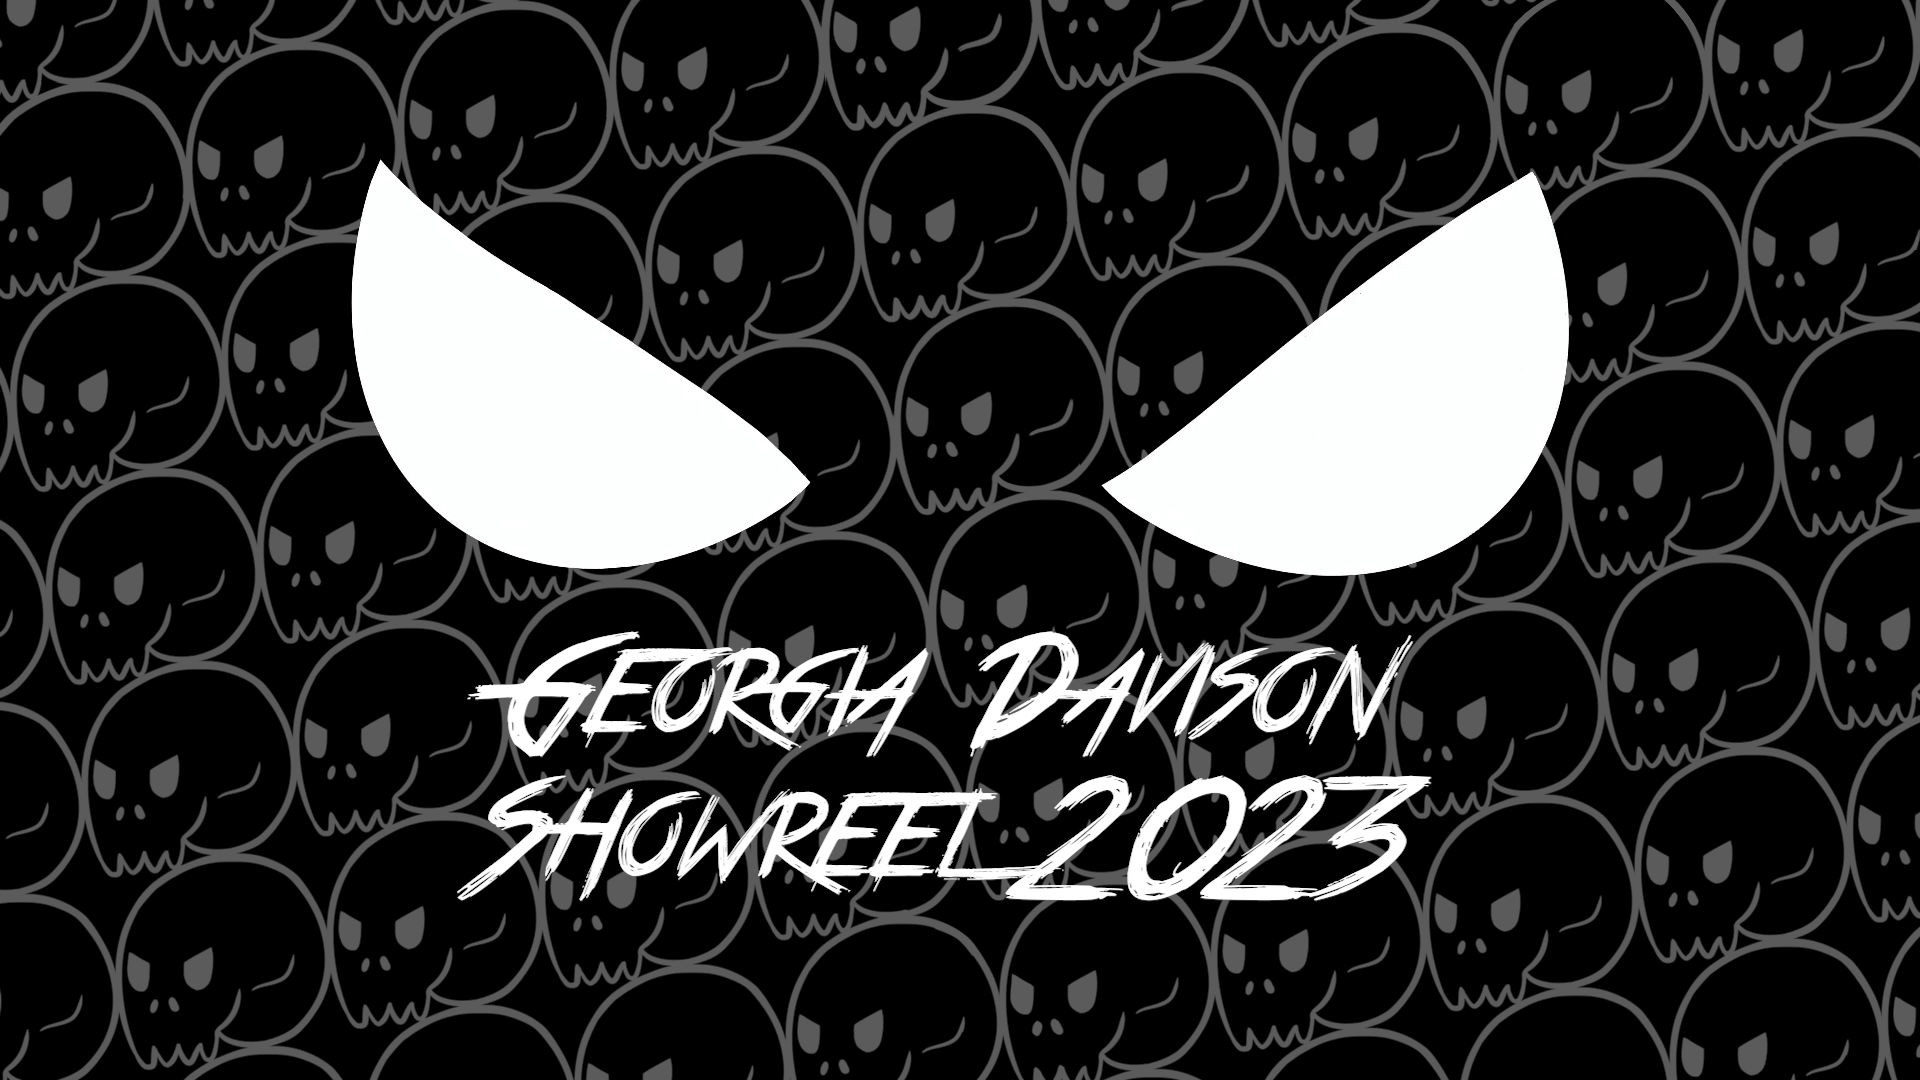 Georgia Davison's 2023 animation showreel focusing on clean up and character animation.